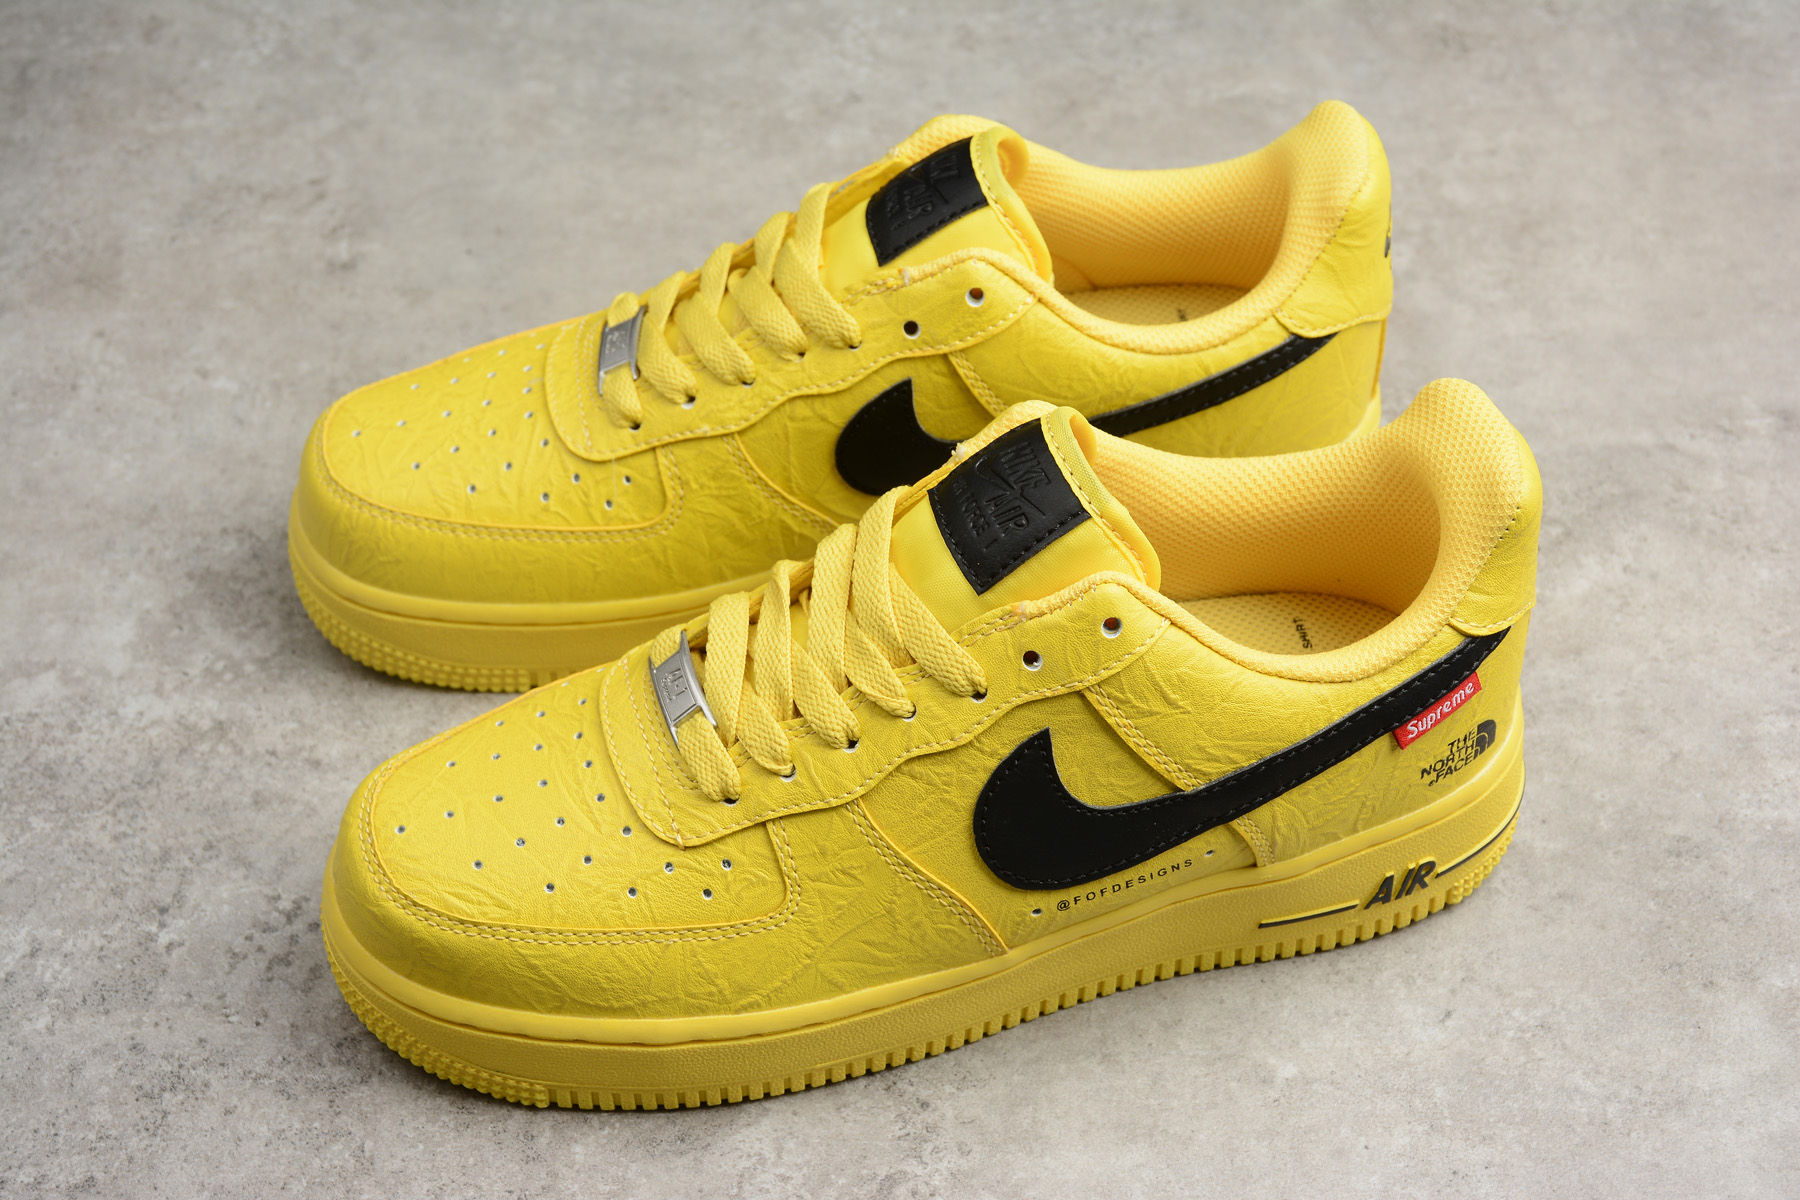 north face air force 1